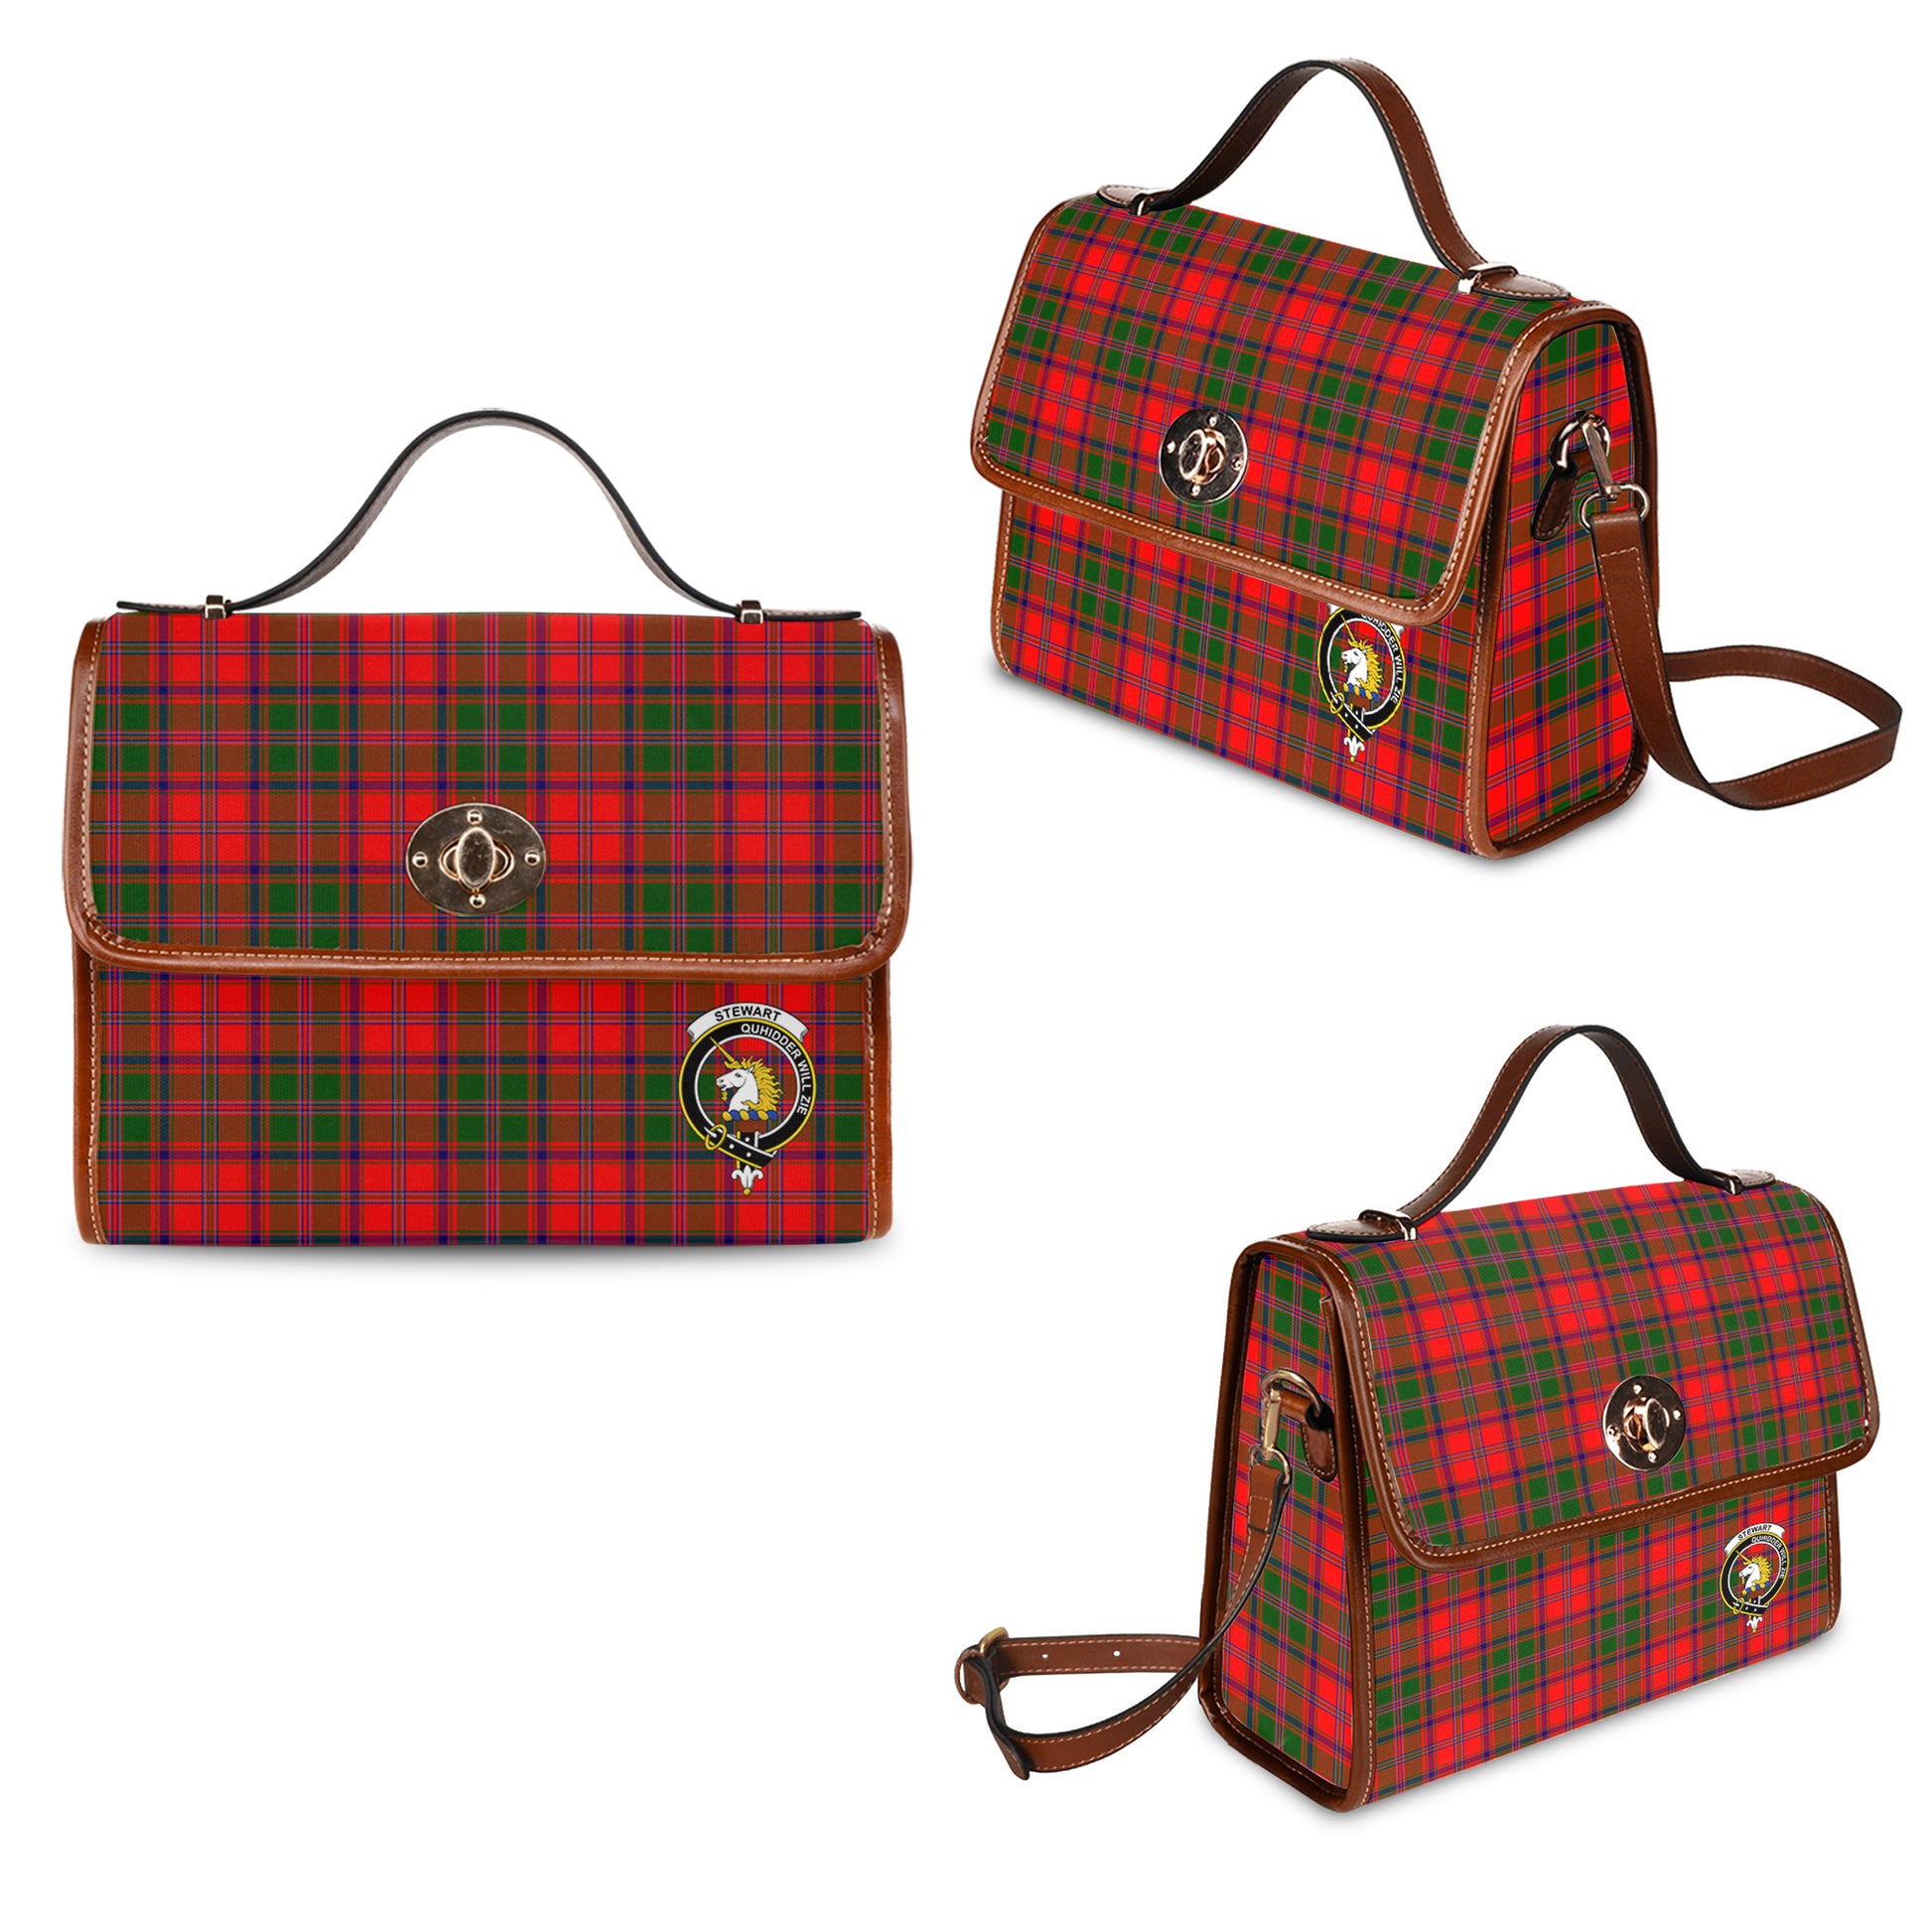 Stewart of Appin Modern Tartan Leather Strap Waterproof Canvas Bag with Family Crest One Size 34cm * 42cm (13.4" x 16.5") - Tartanvibesclothing